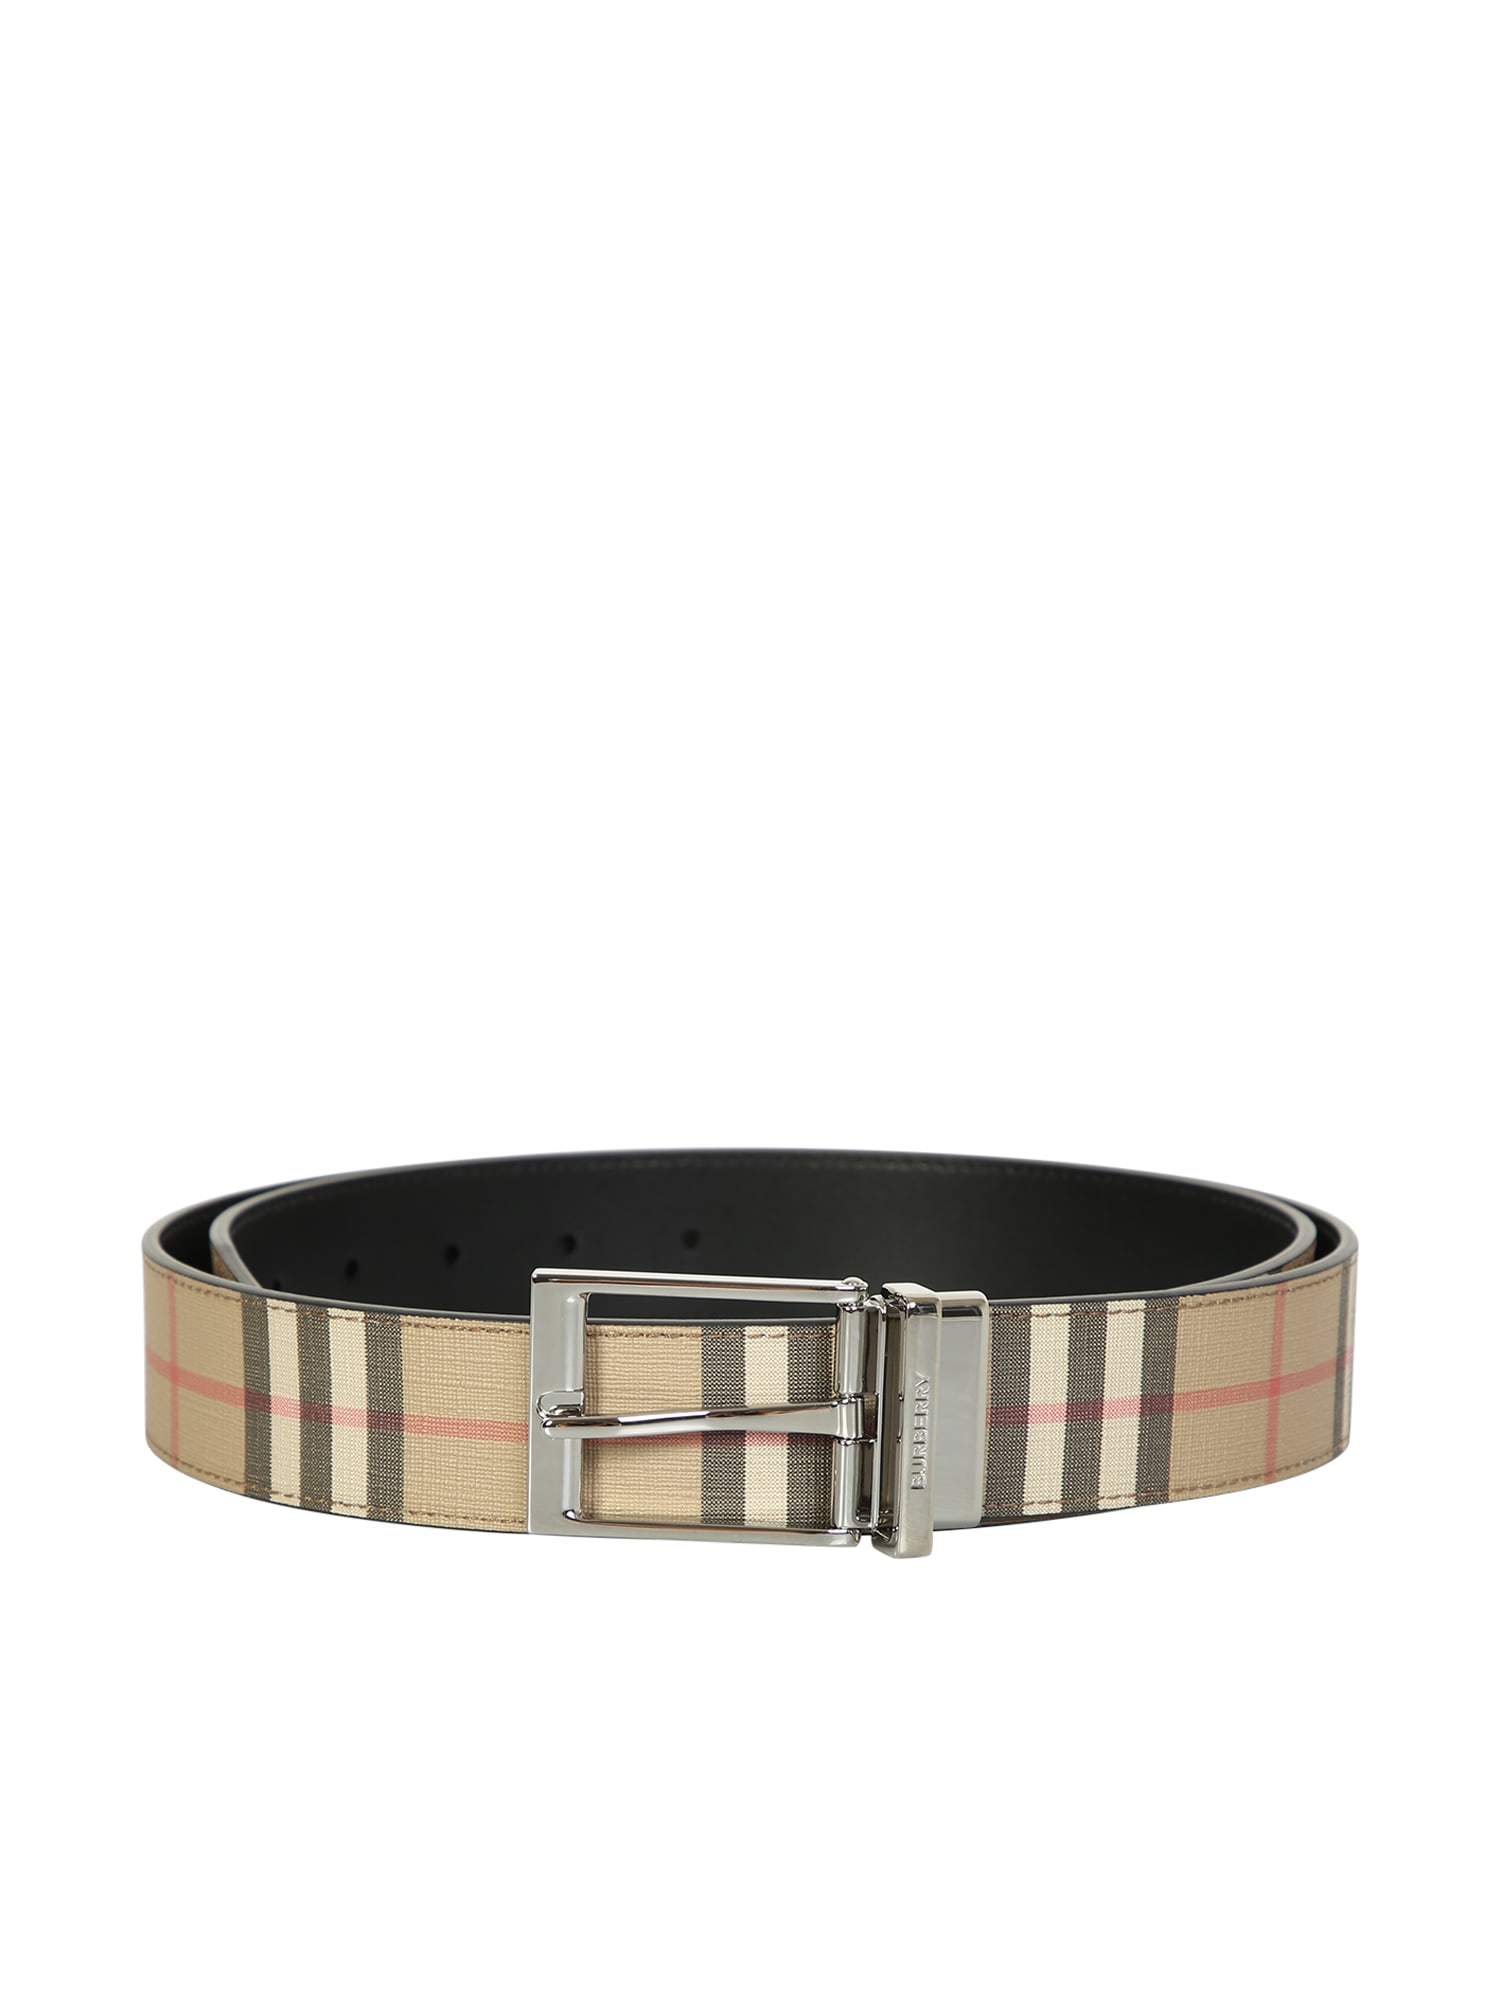 Burberry Vintage-check Belt By, For A Touch Of Elegance That Completes The Most Essential Outfits